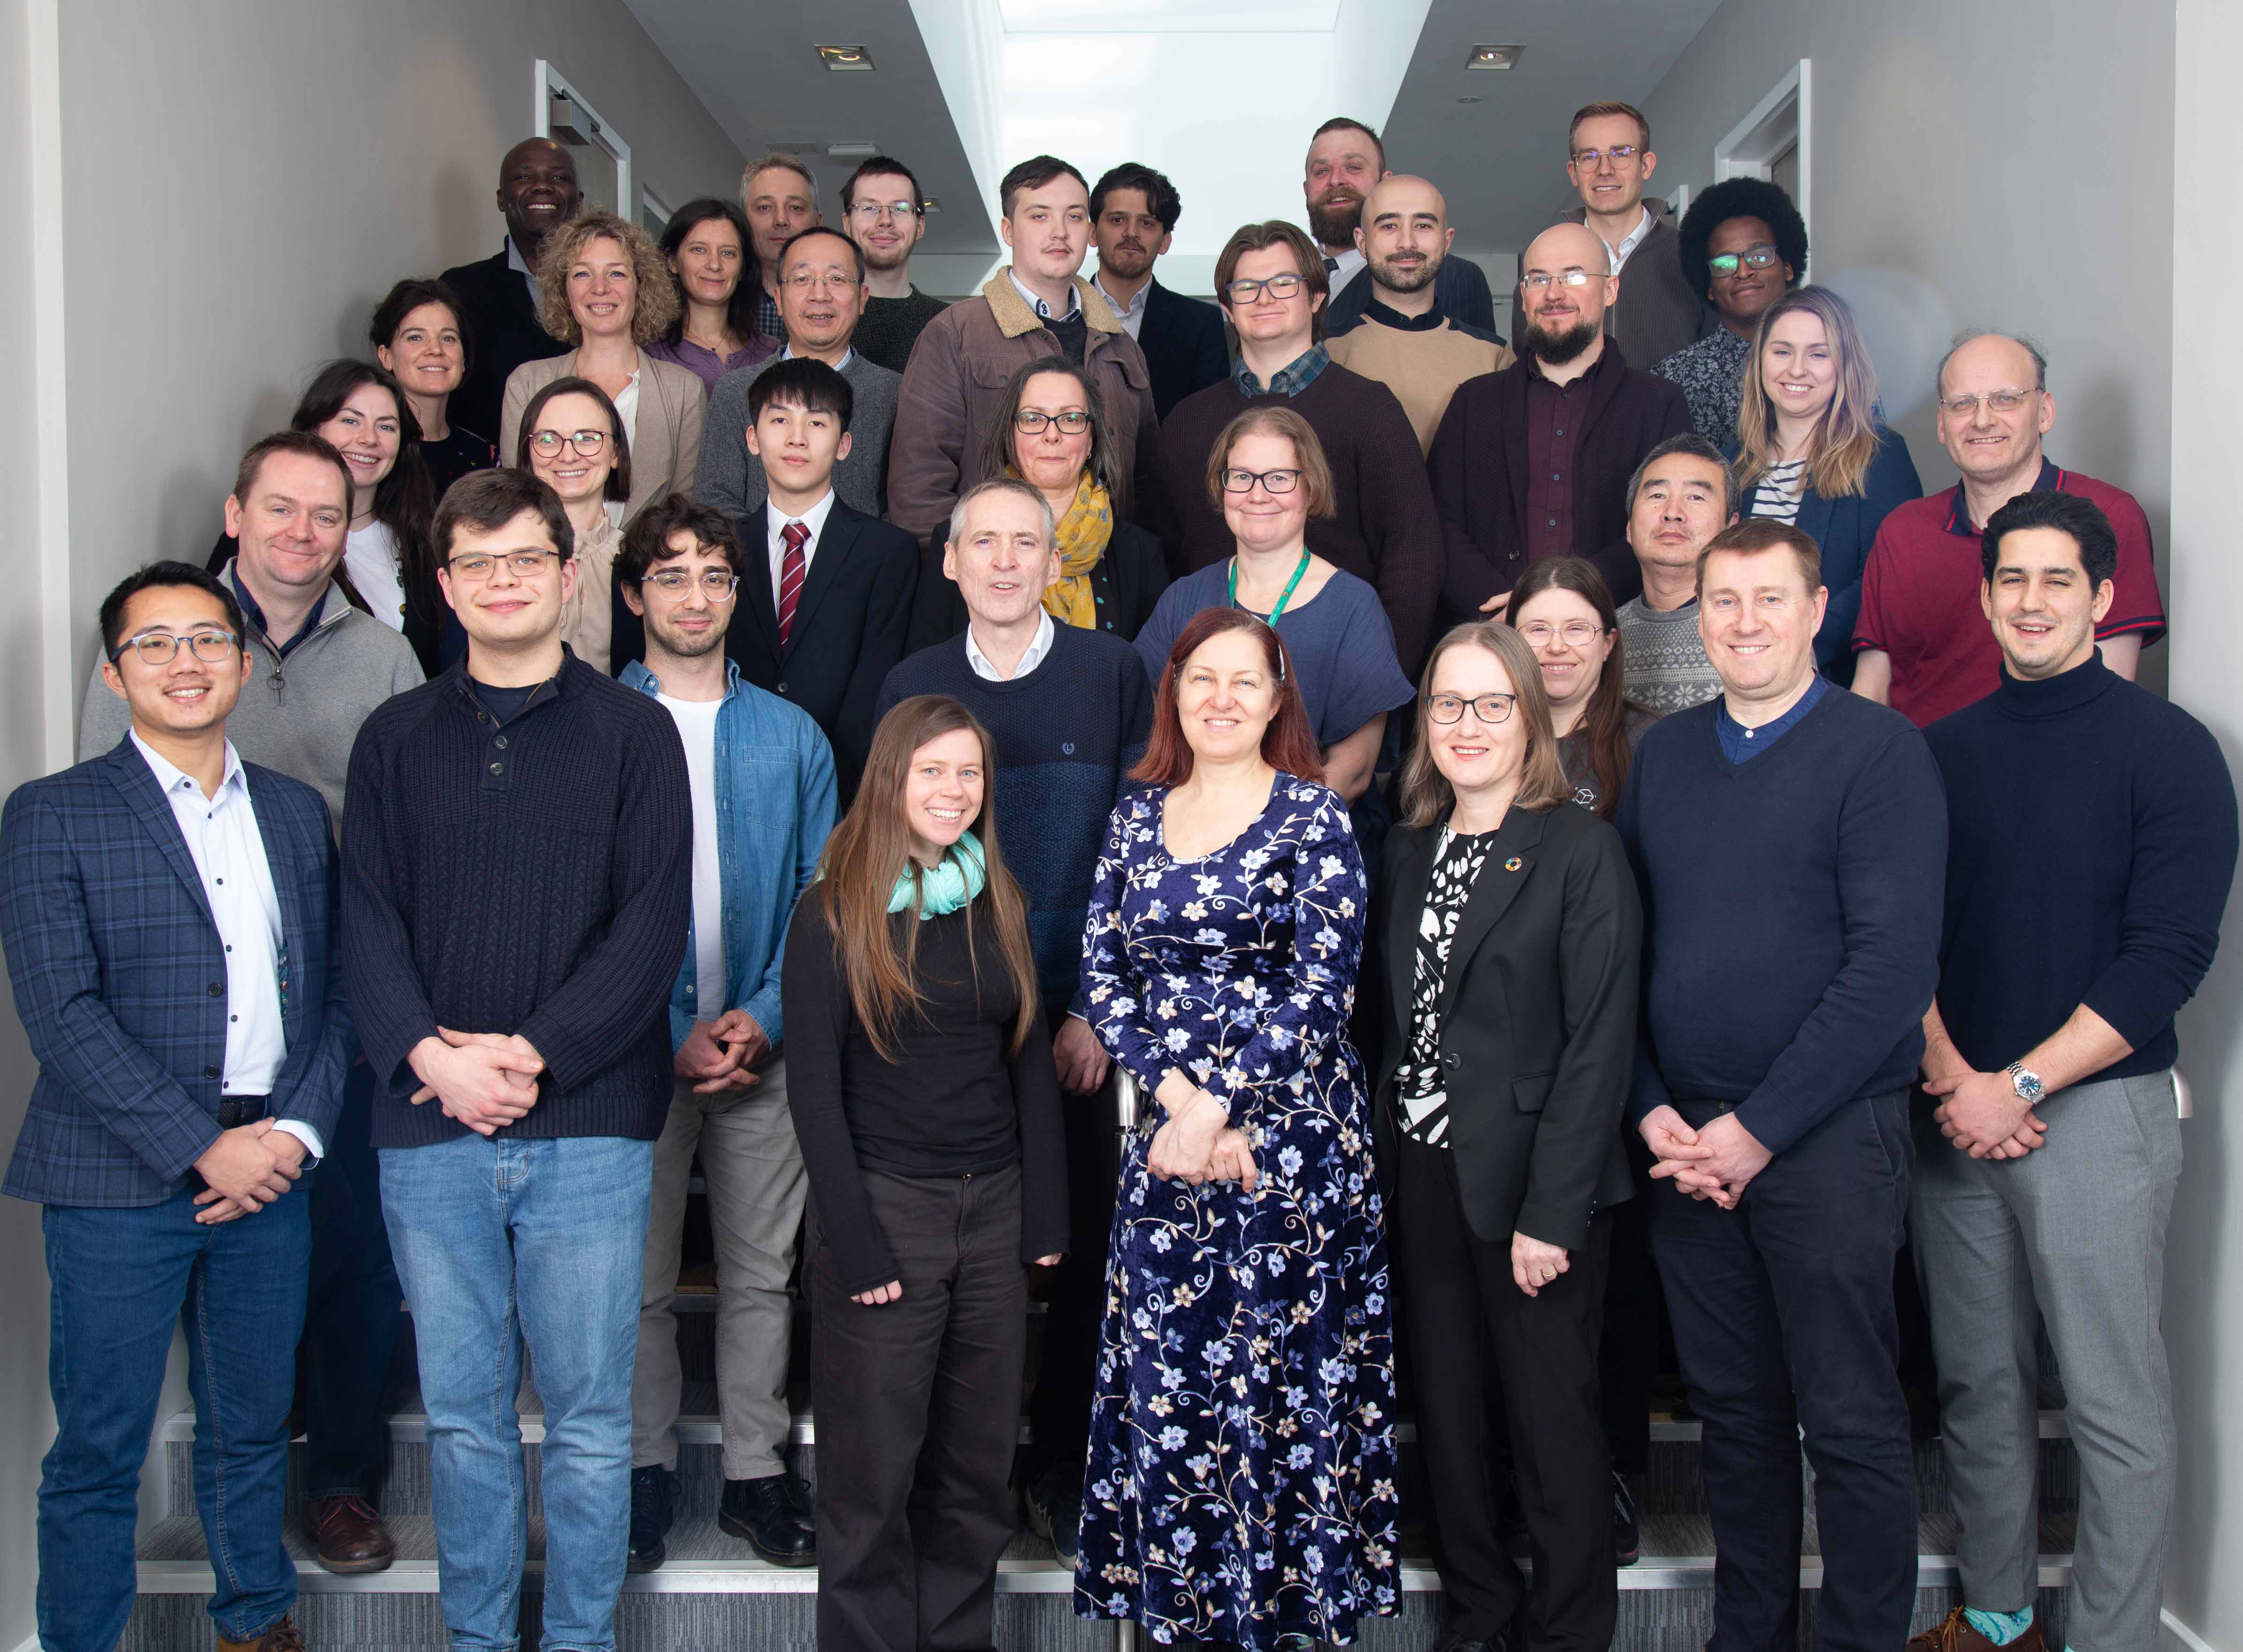 The Relib team - The team is a multidisciplinary collaboration between the universities of Newcastle University, Edinburgh, Leicester, Oxford and Imperial College, and led by the University of Birmingham.